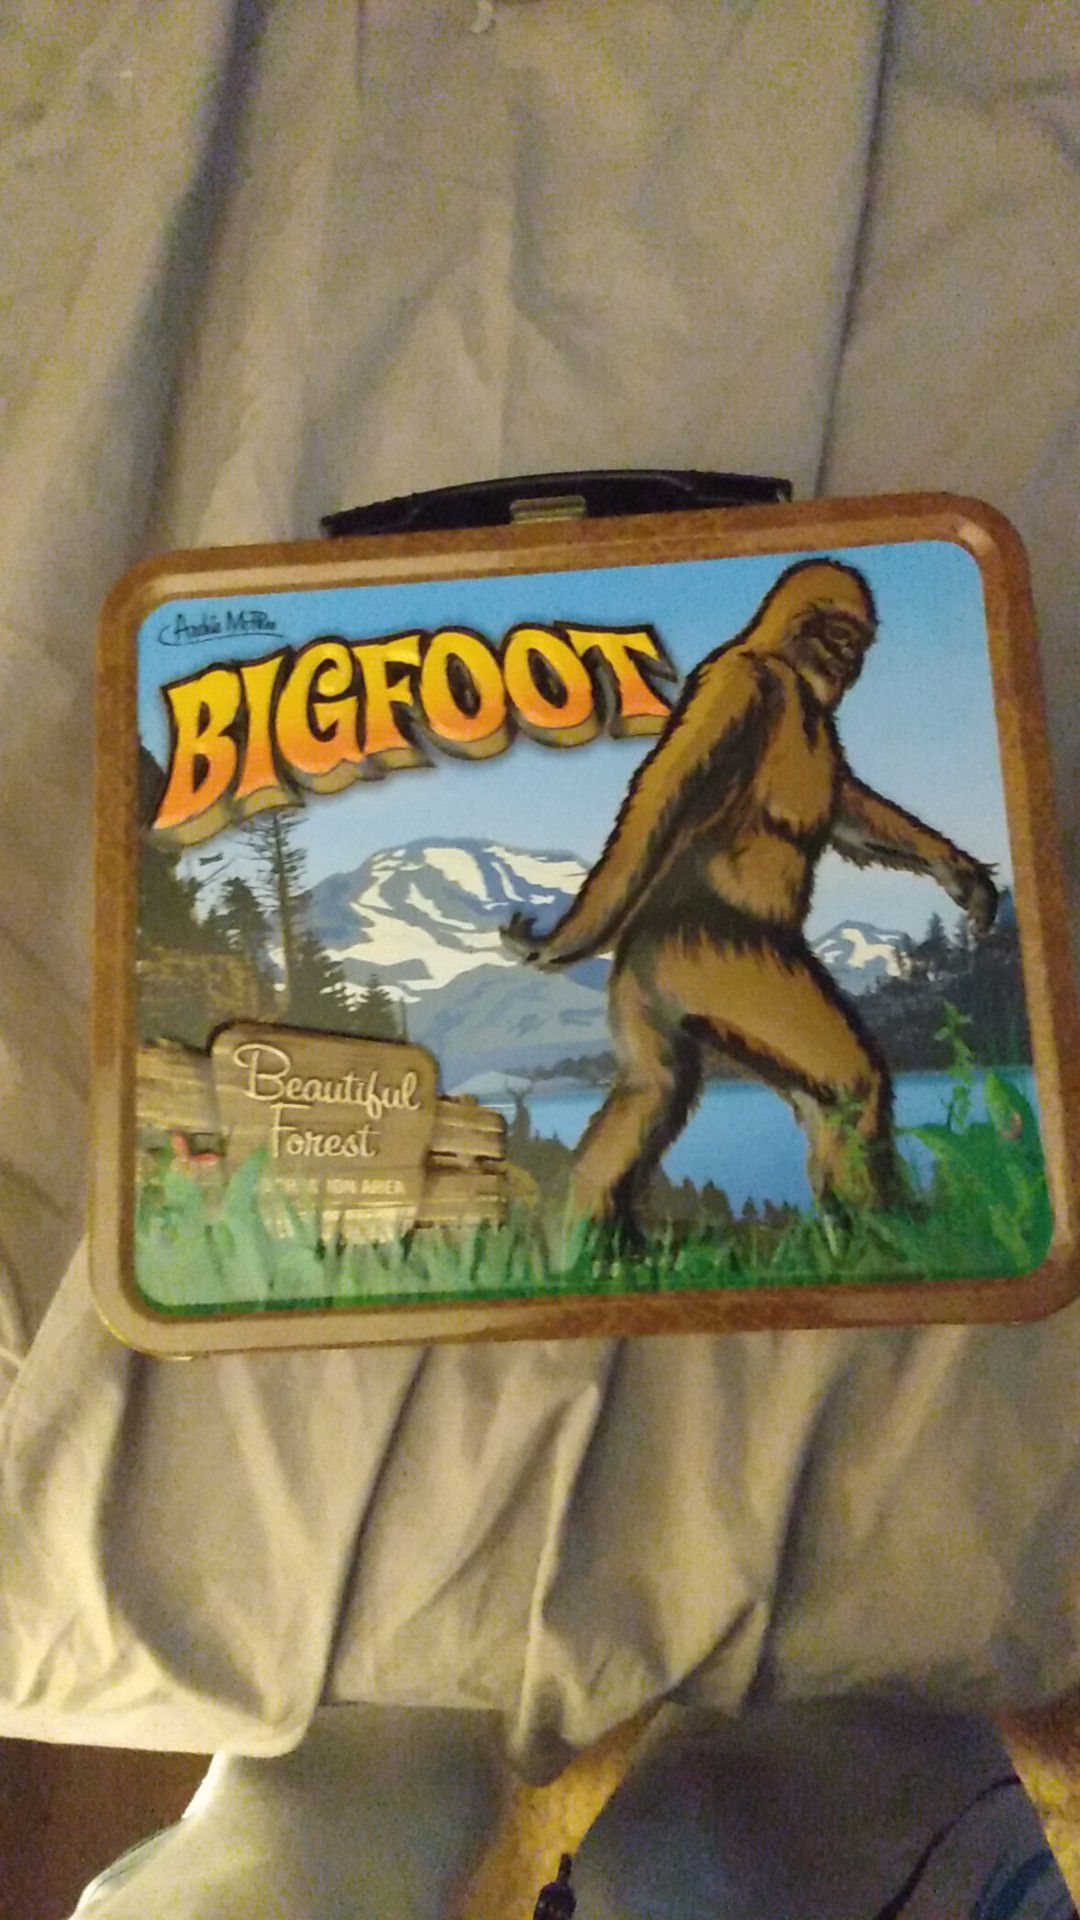 Bigfoot collector's lunch box